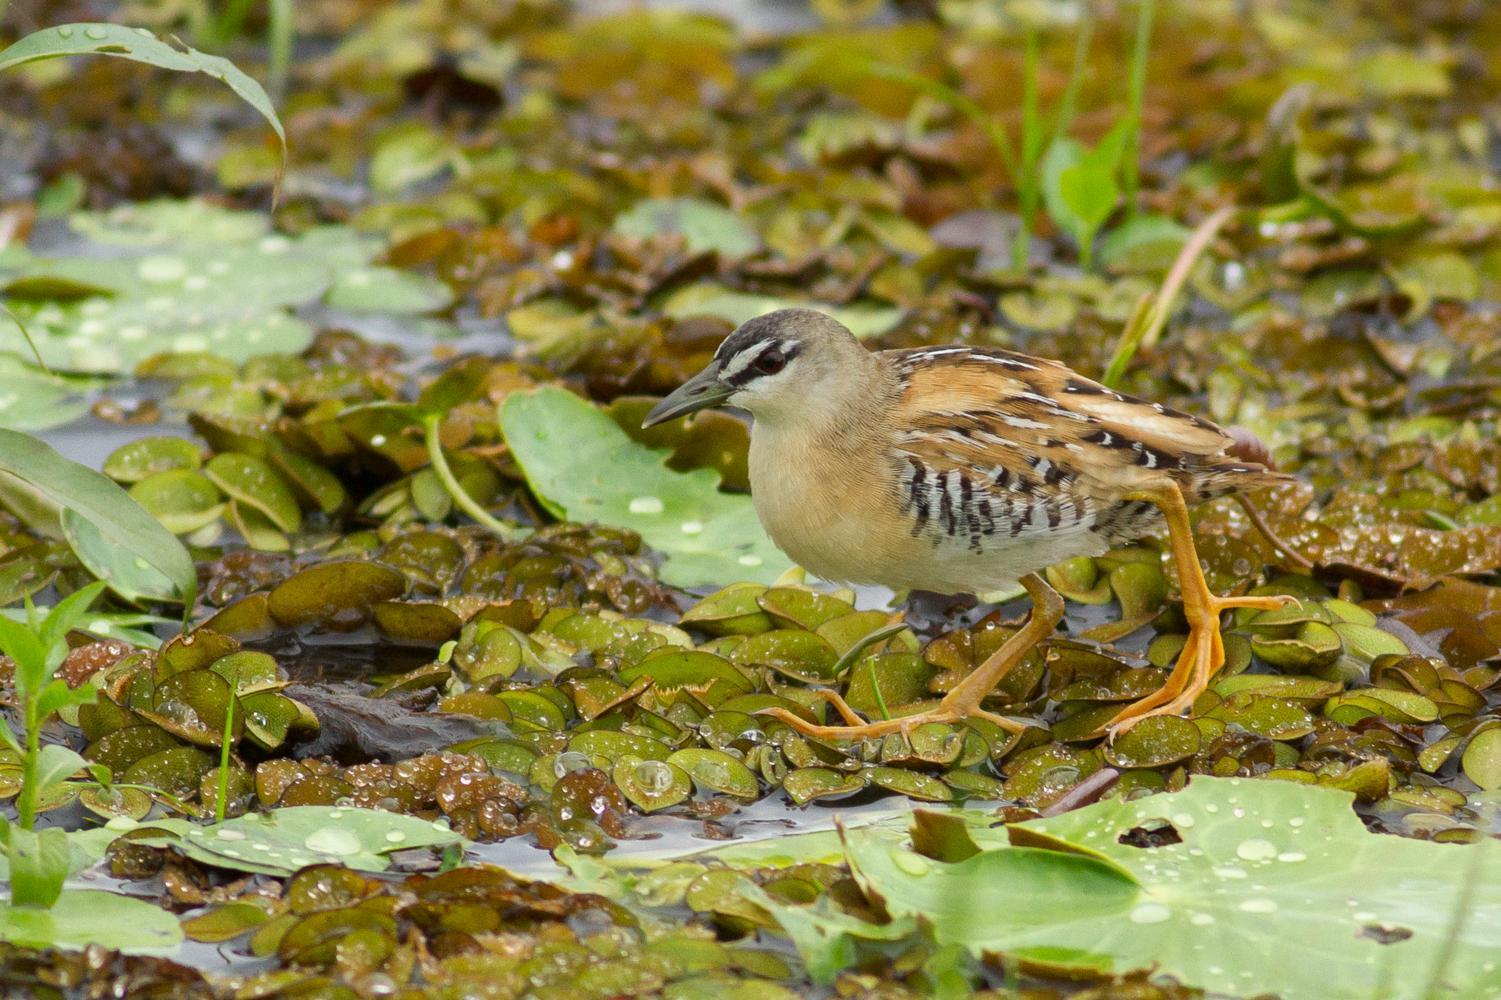 Yellow-breasted Crake Photo by Tom Johnson